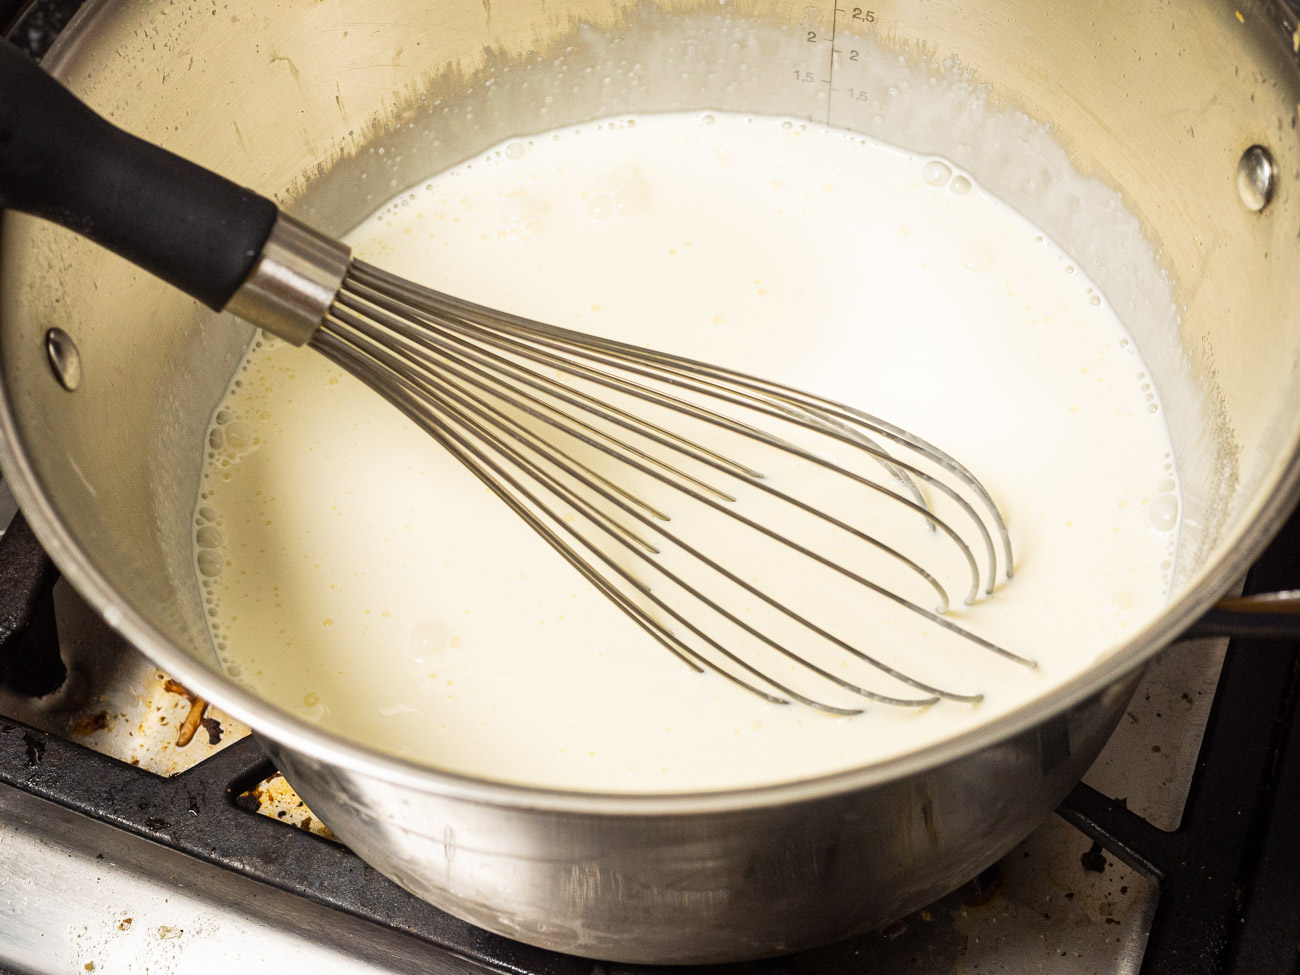 Combine 3 cups of the cream with milk and sugar in a large saucepan. Bring to simmer over medium heat, stirring constantly until sugar is dissolved. Remove from heat and whisk in 2 cups of the white chocolate chips until they are melted and fully incorporated. Allow to cool for 10 minutes.